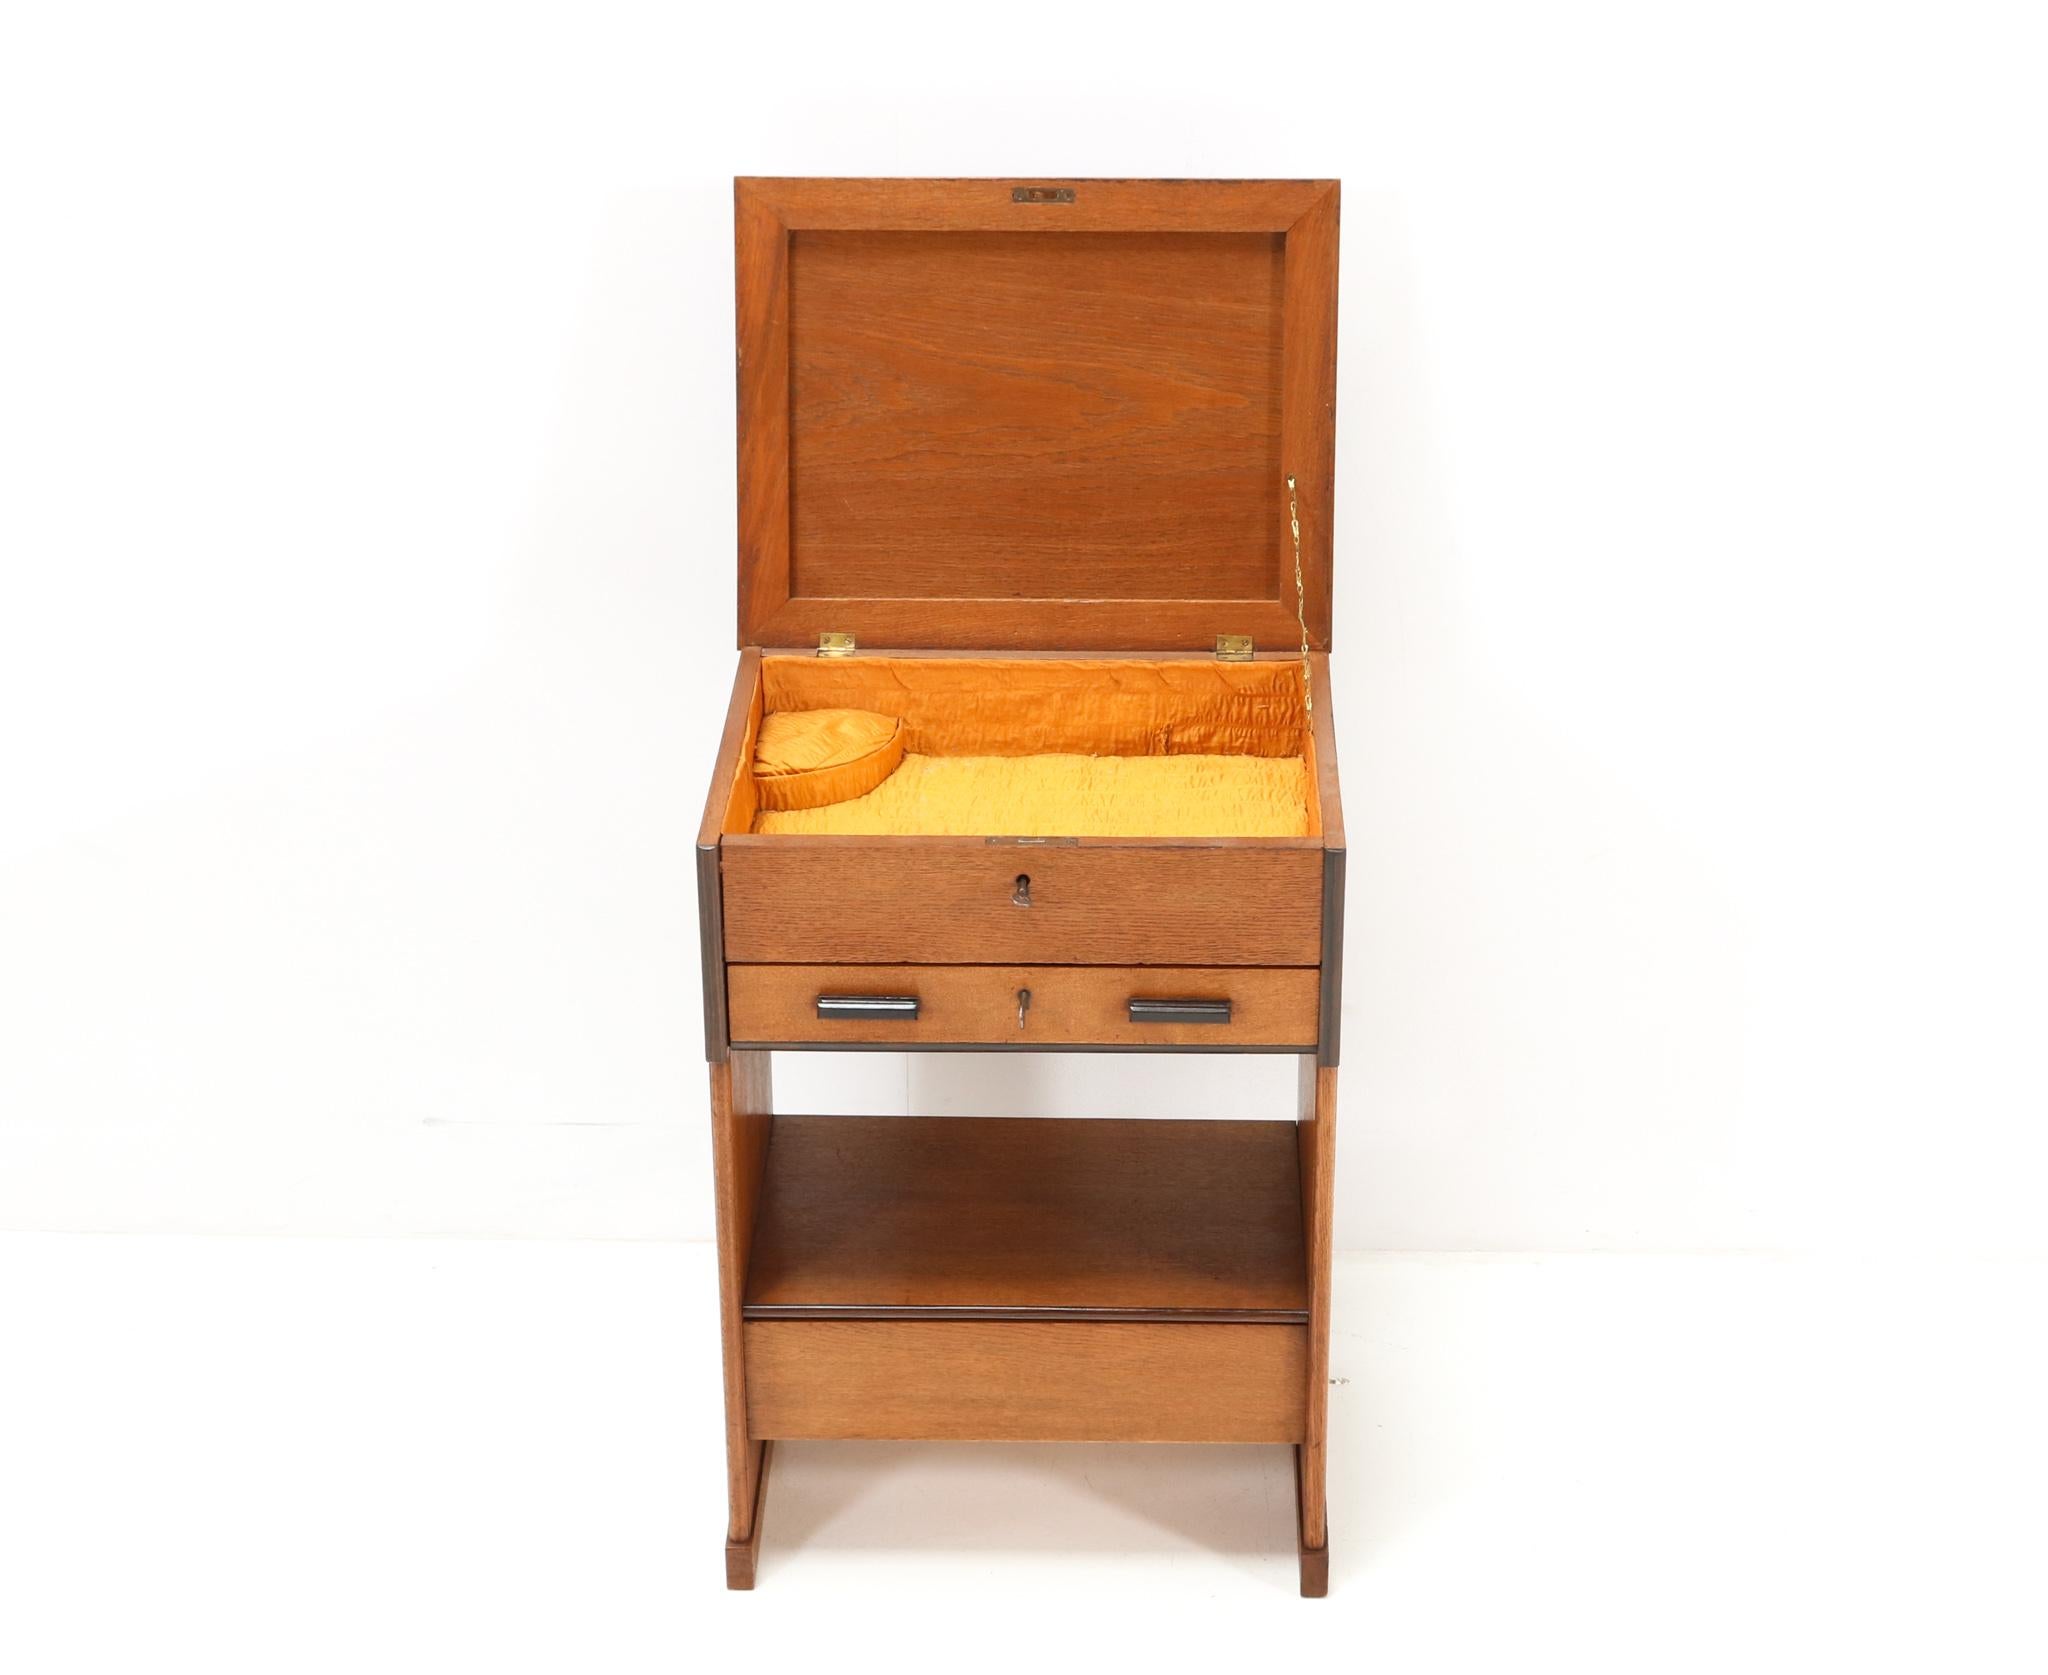 Early 20th Century Oak Art Deco Modernist Sewing Table by P.E.L. Izeren for Genneper Molen, 1920s For Sale